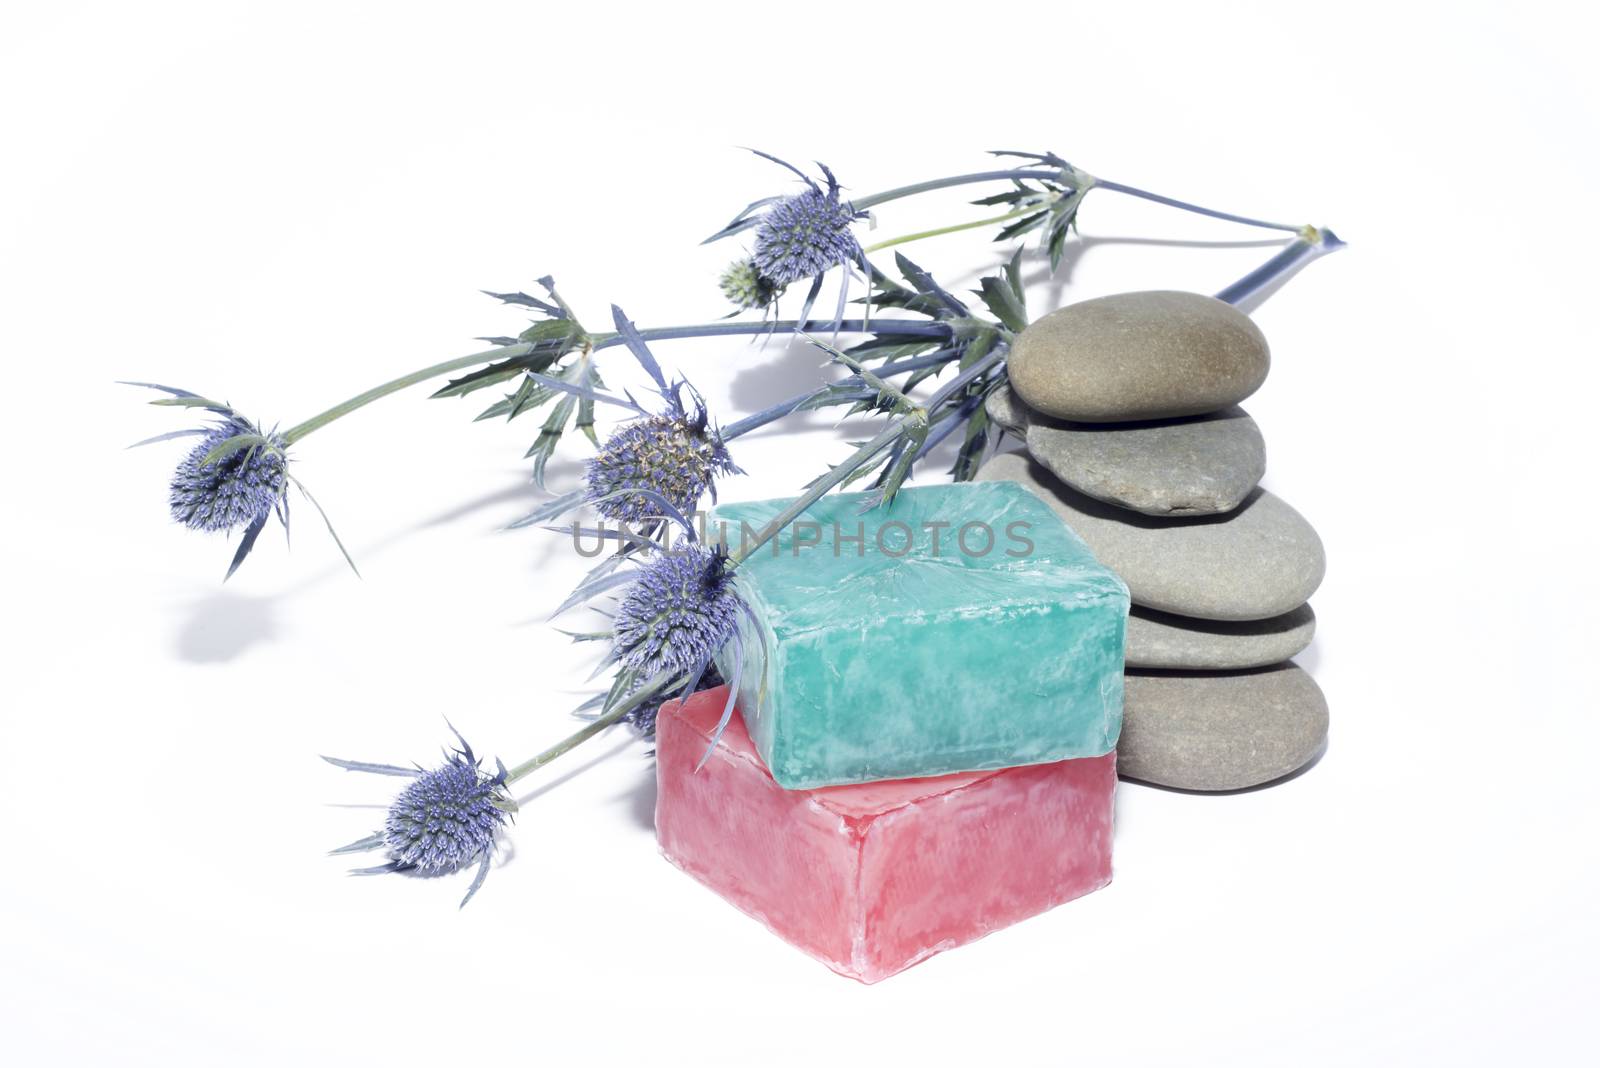 soaps off various shades with grey sone pebbles and lavender